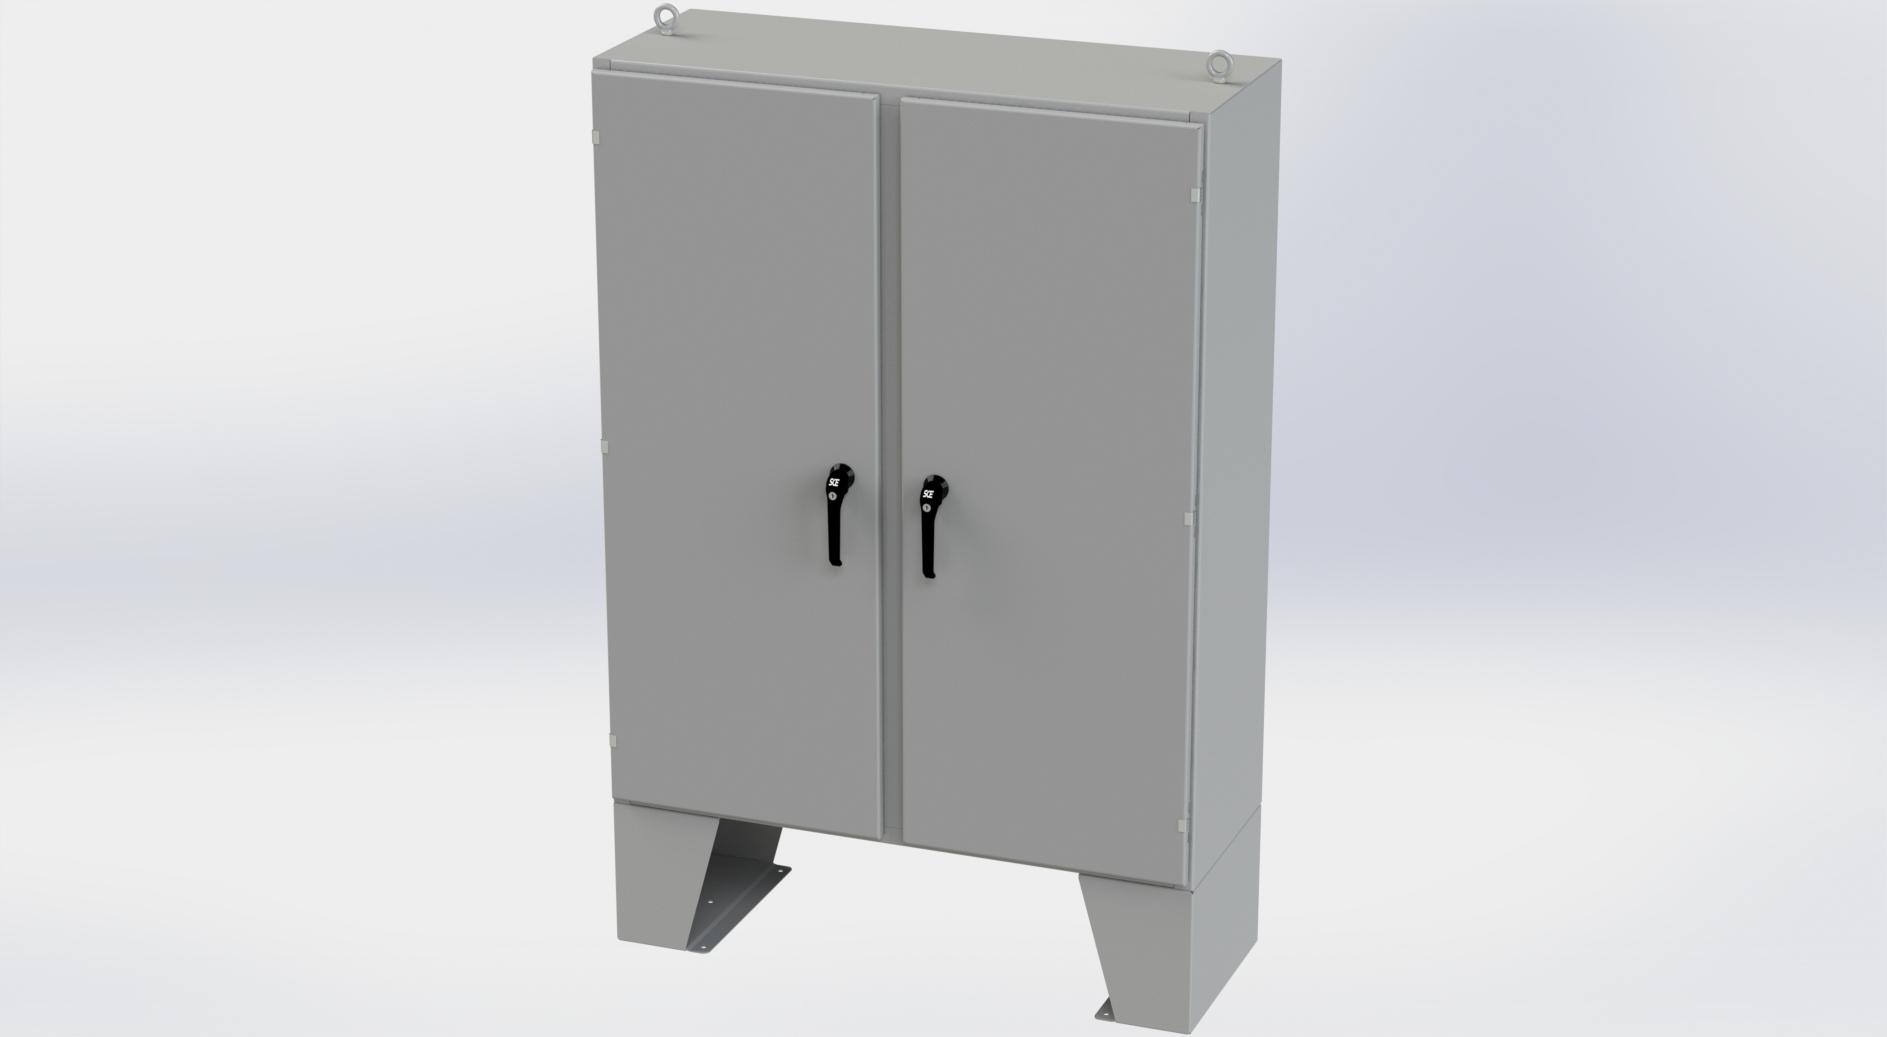 Saginaw Control SCE-60EL4818LPPL 2DR EL LPPL Enclosure, Height:60.00", Width:48.00", Depth:18.00", ANSI-61 gray powder coating inside and out. Optional sub-panels are powder coated white.